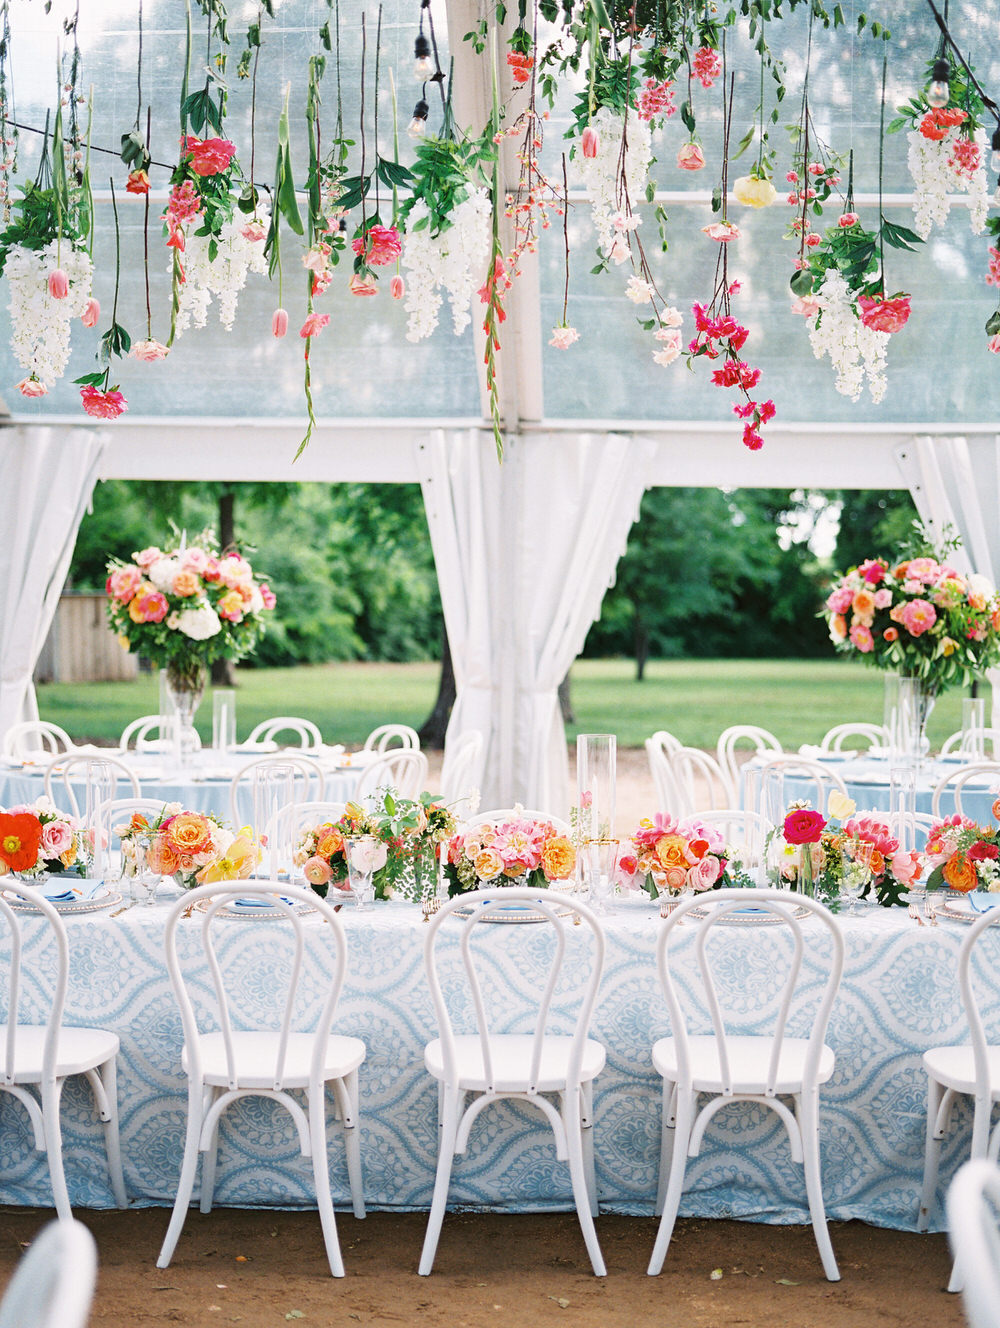 drippy florals hang over the head table at the reception